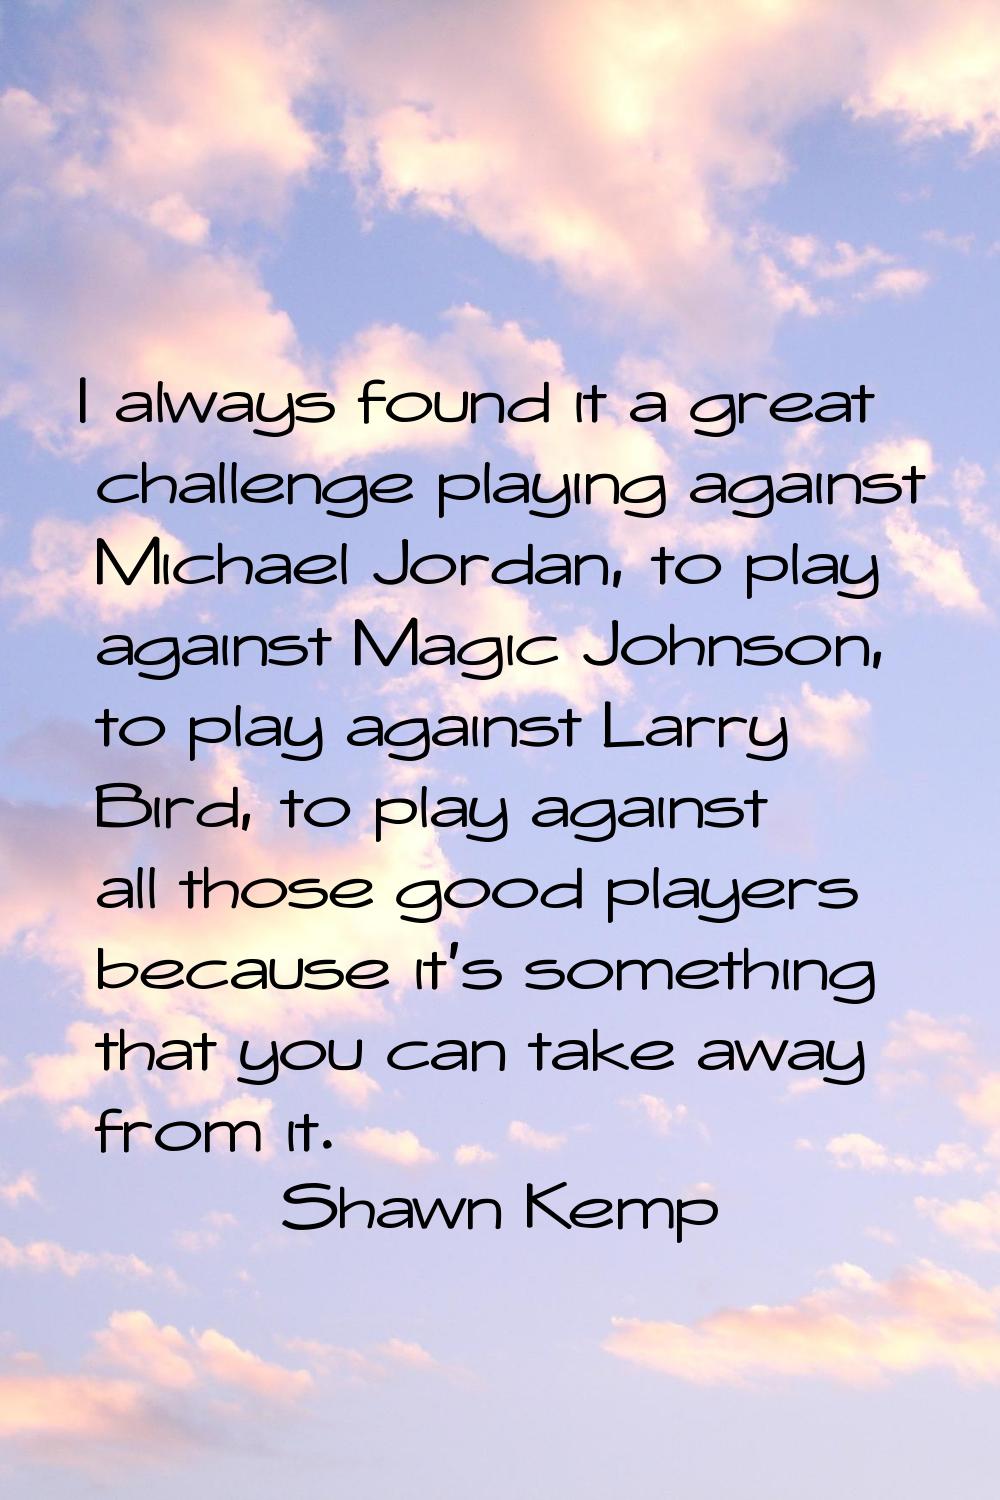 I always found it a great challenge playing against Michael Jordan, to play against Magic Johnson, 